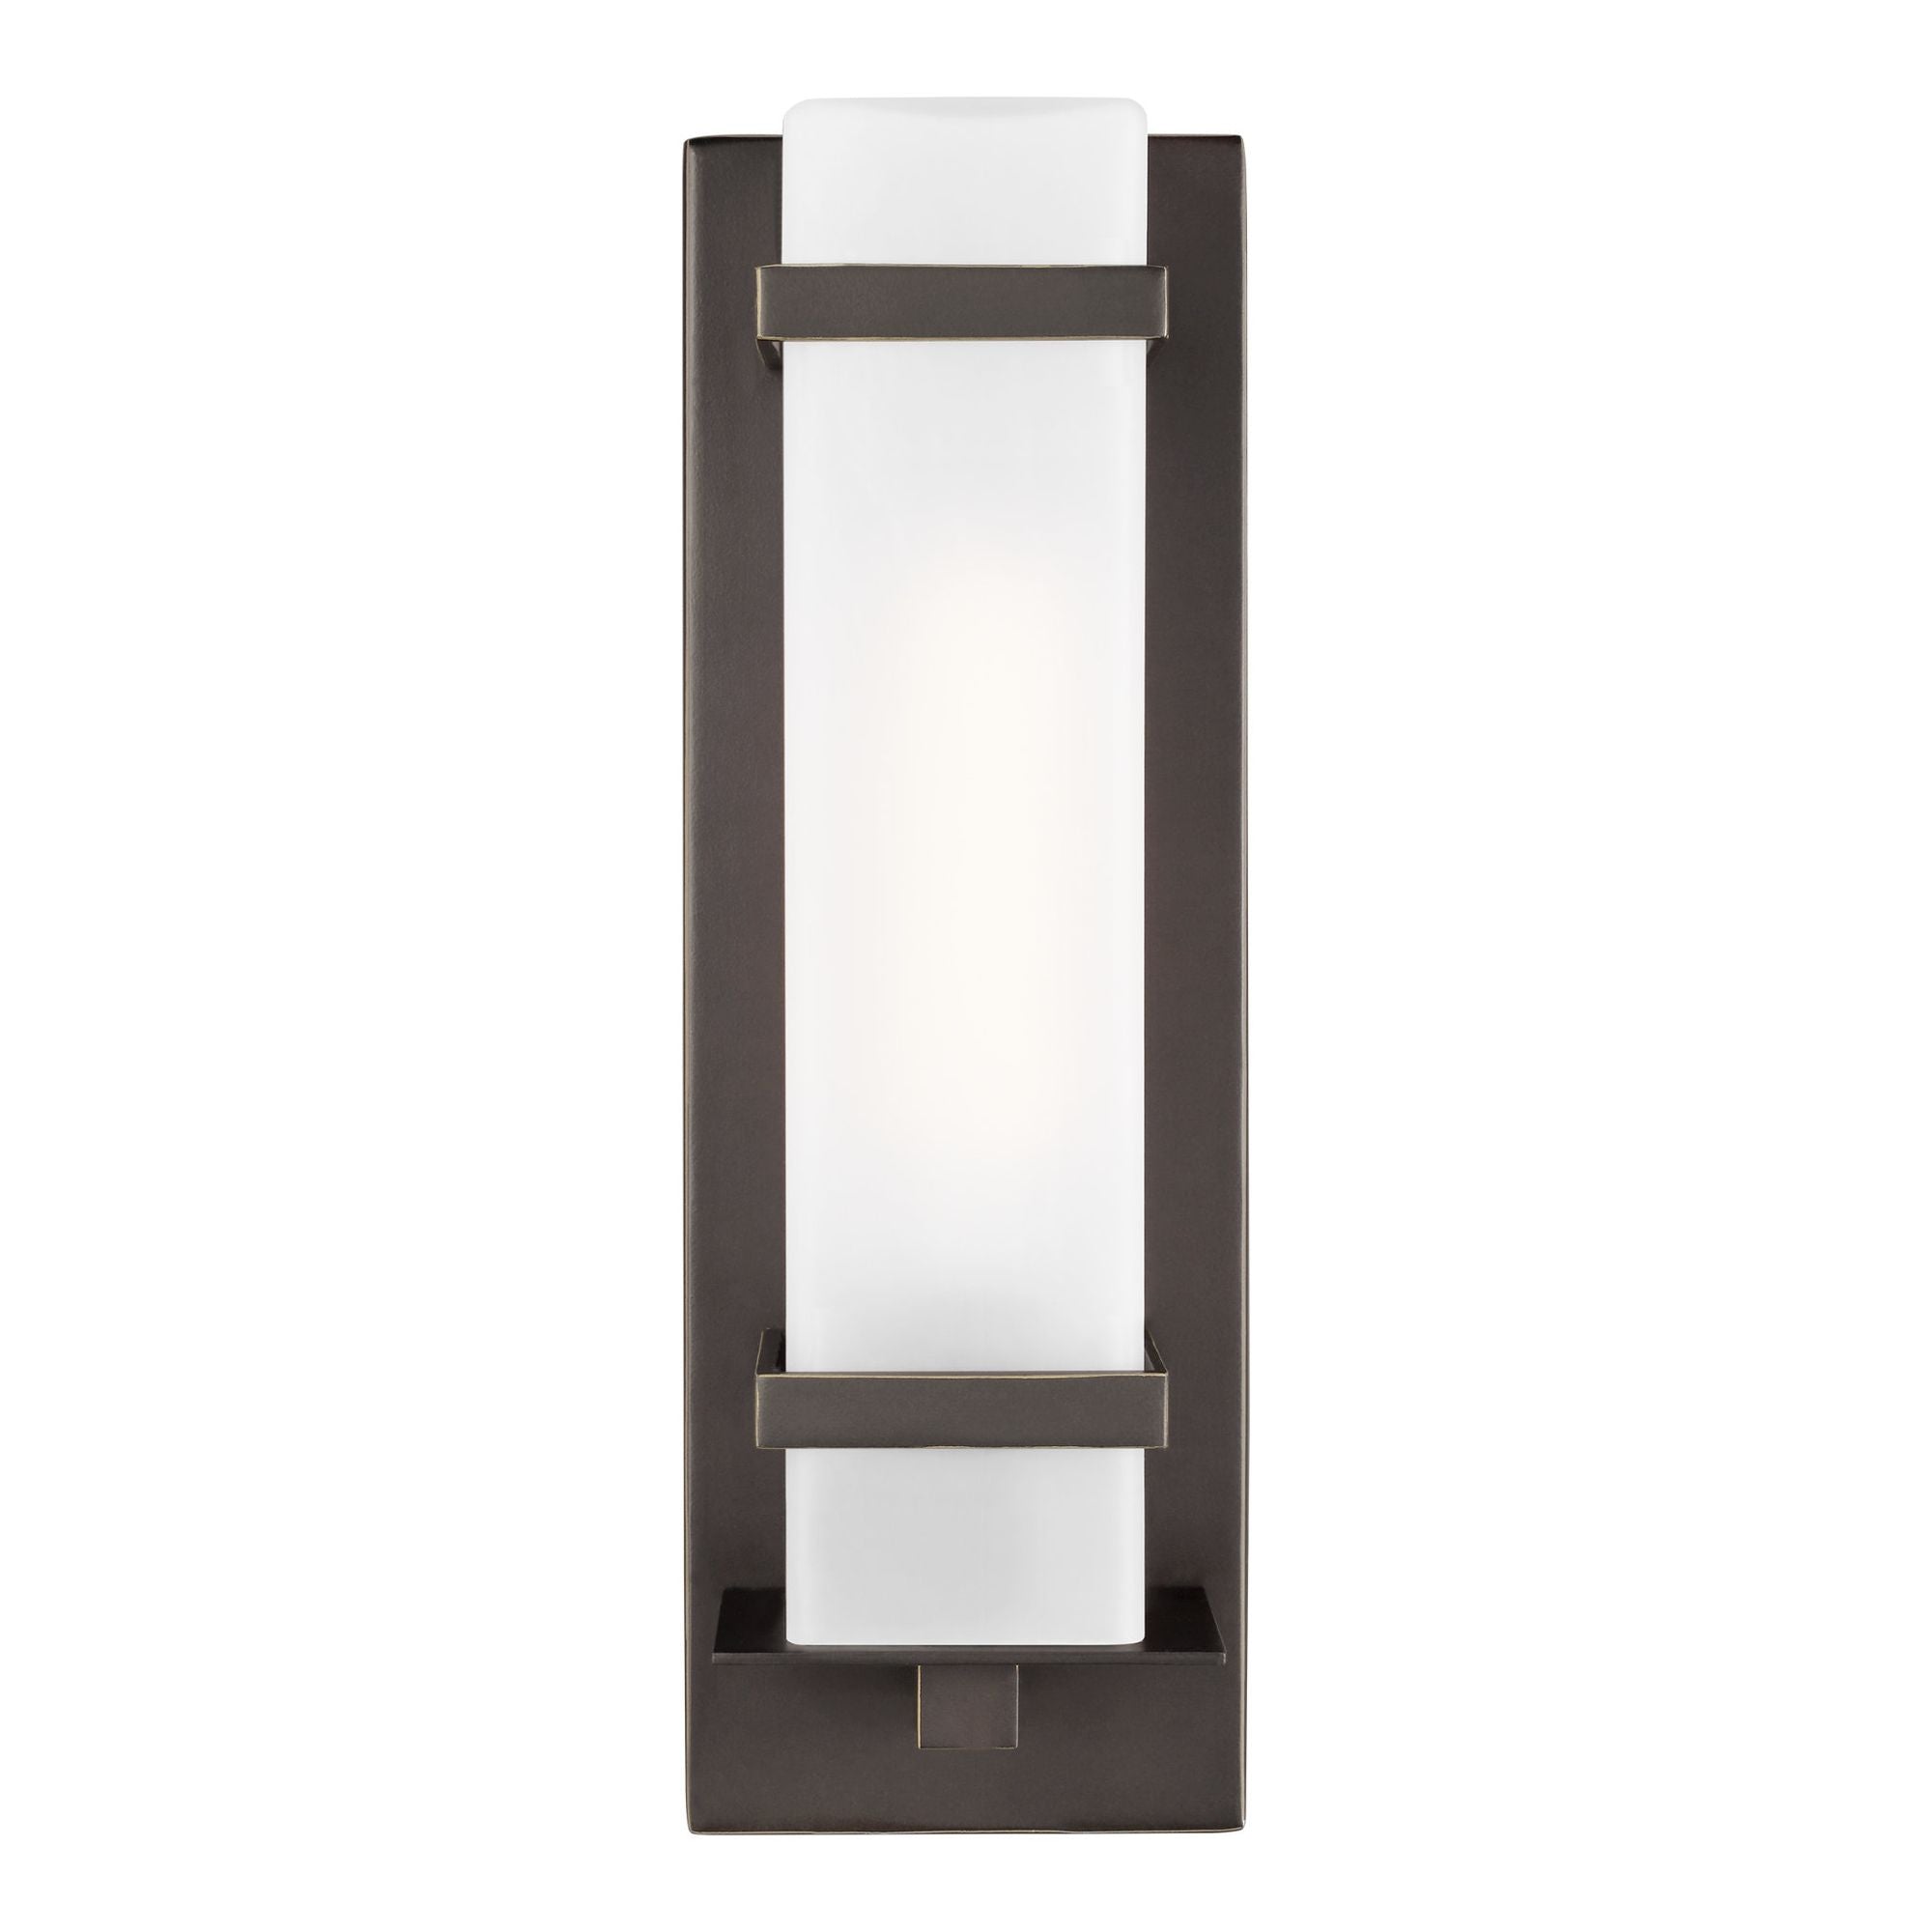 Alban Large One Light Outdoor Wall Lantern LED Modern Fixture 8" Width 24.625" Height Aluminum Square Etched Opal Shade in Antique Bronze